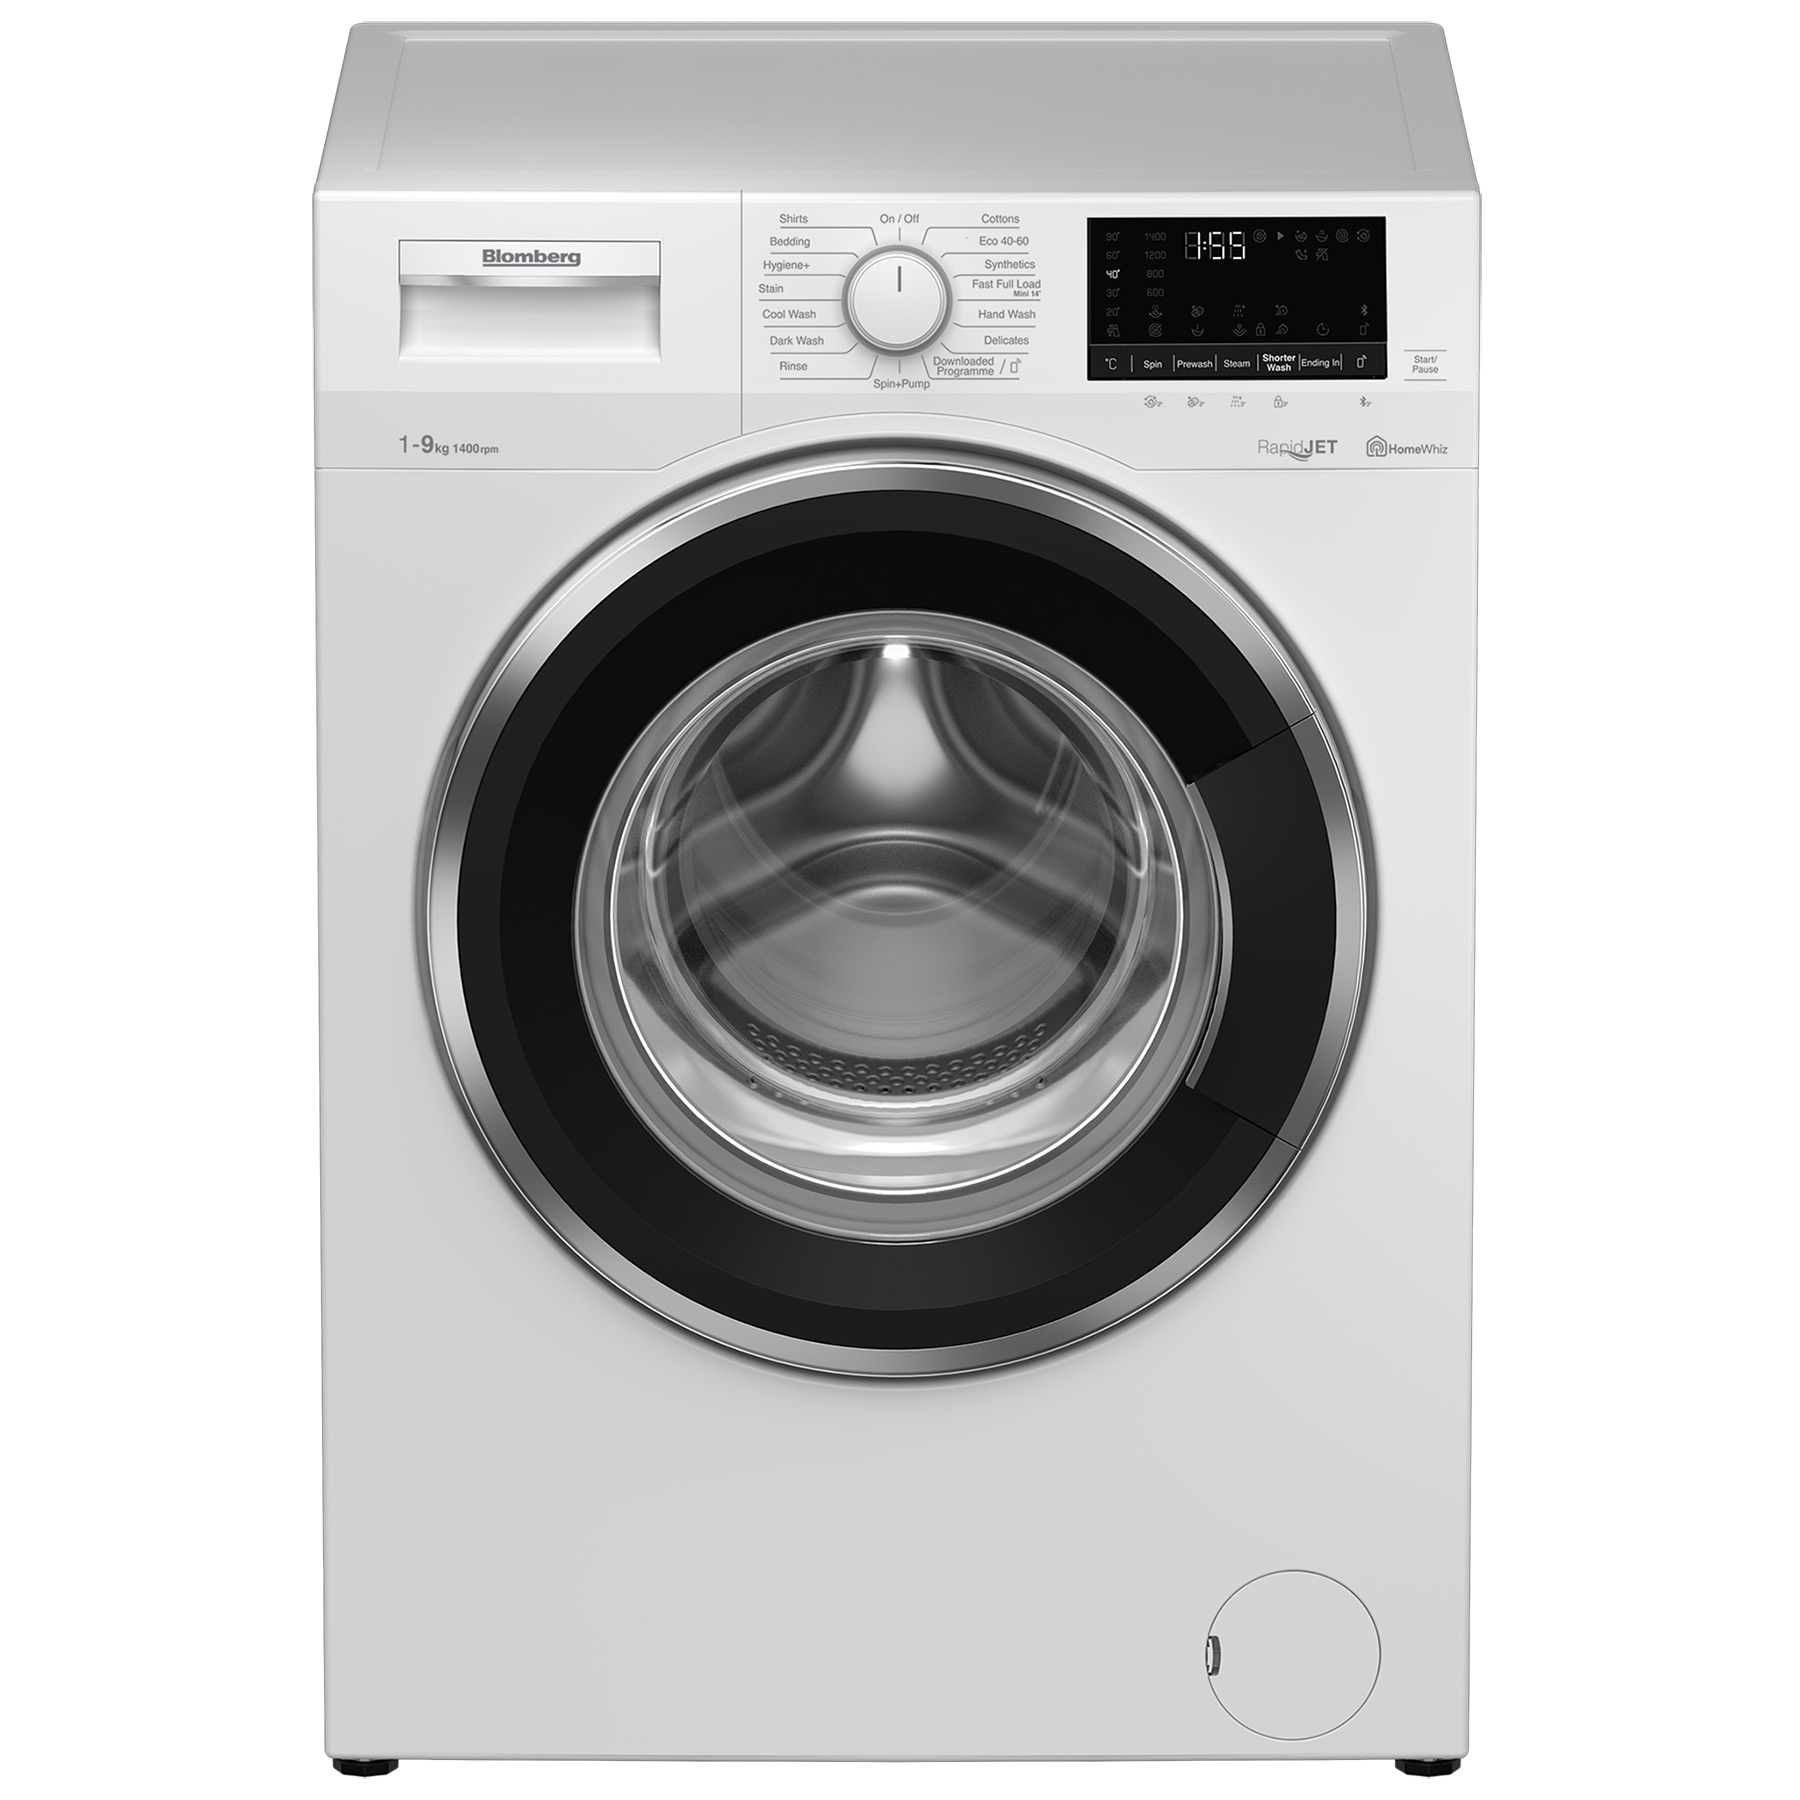 Image of Blomberg LWF194520QW Washing Machine in White 1400rpm 9kg A Rated 3yr